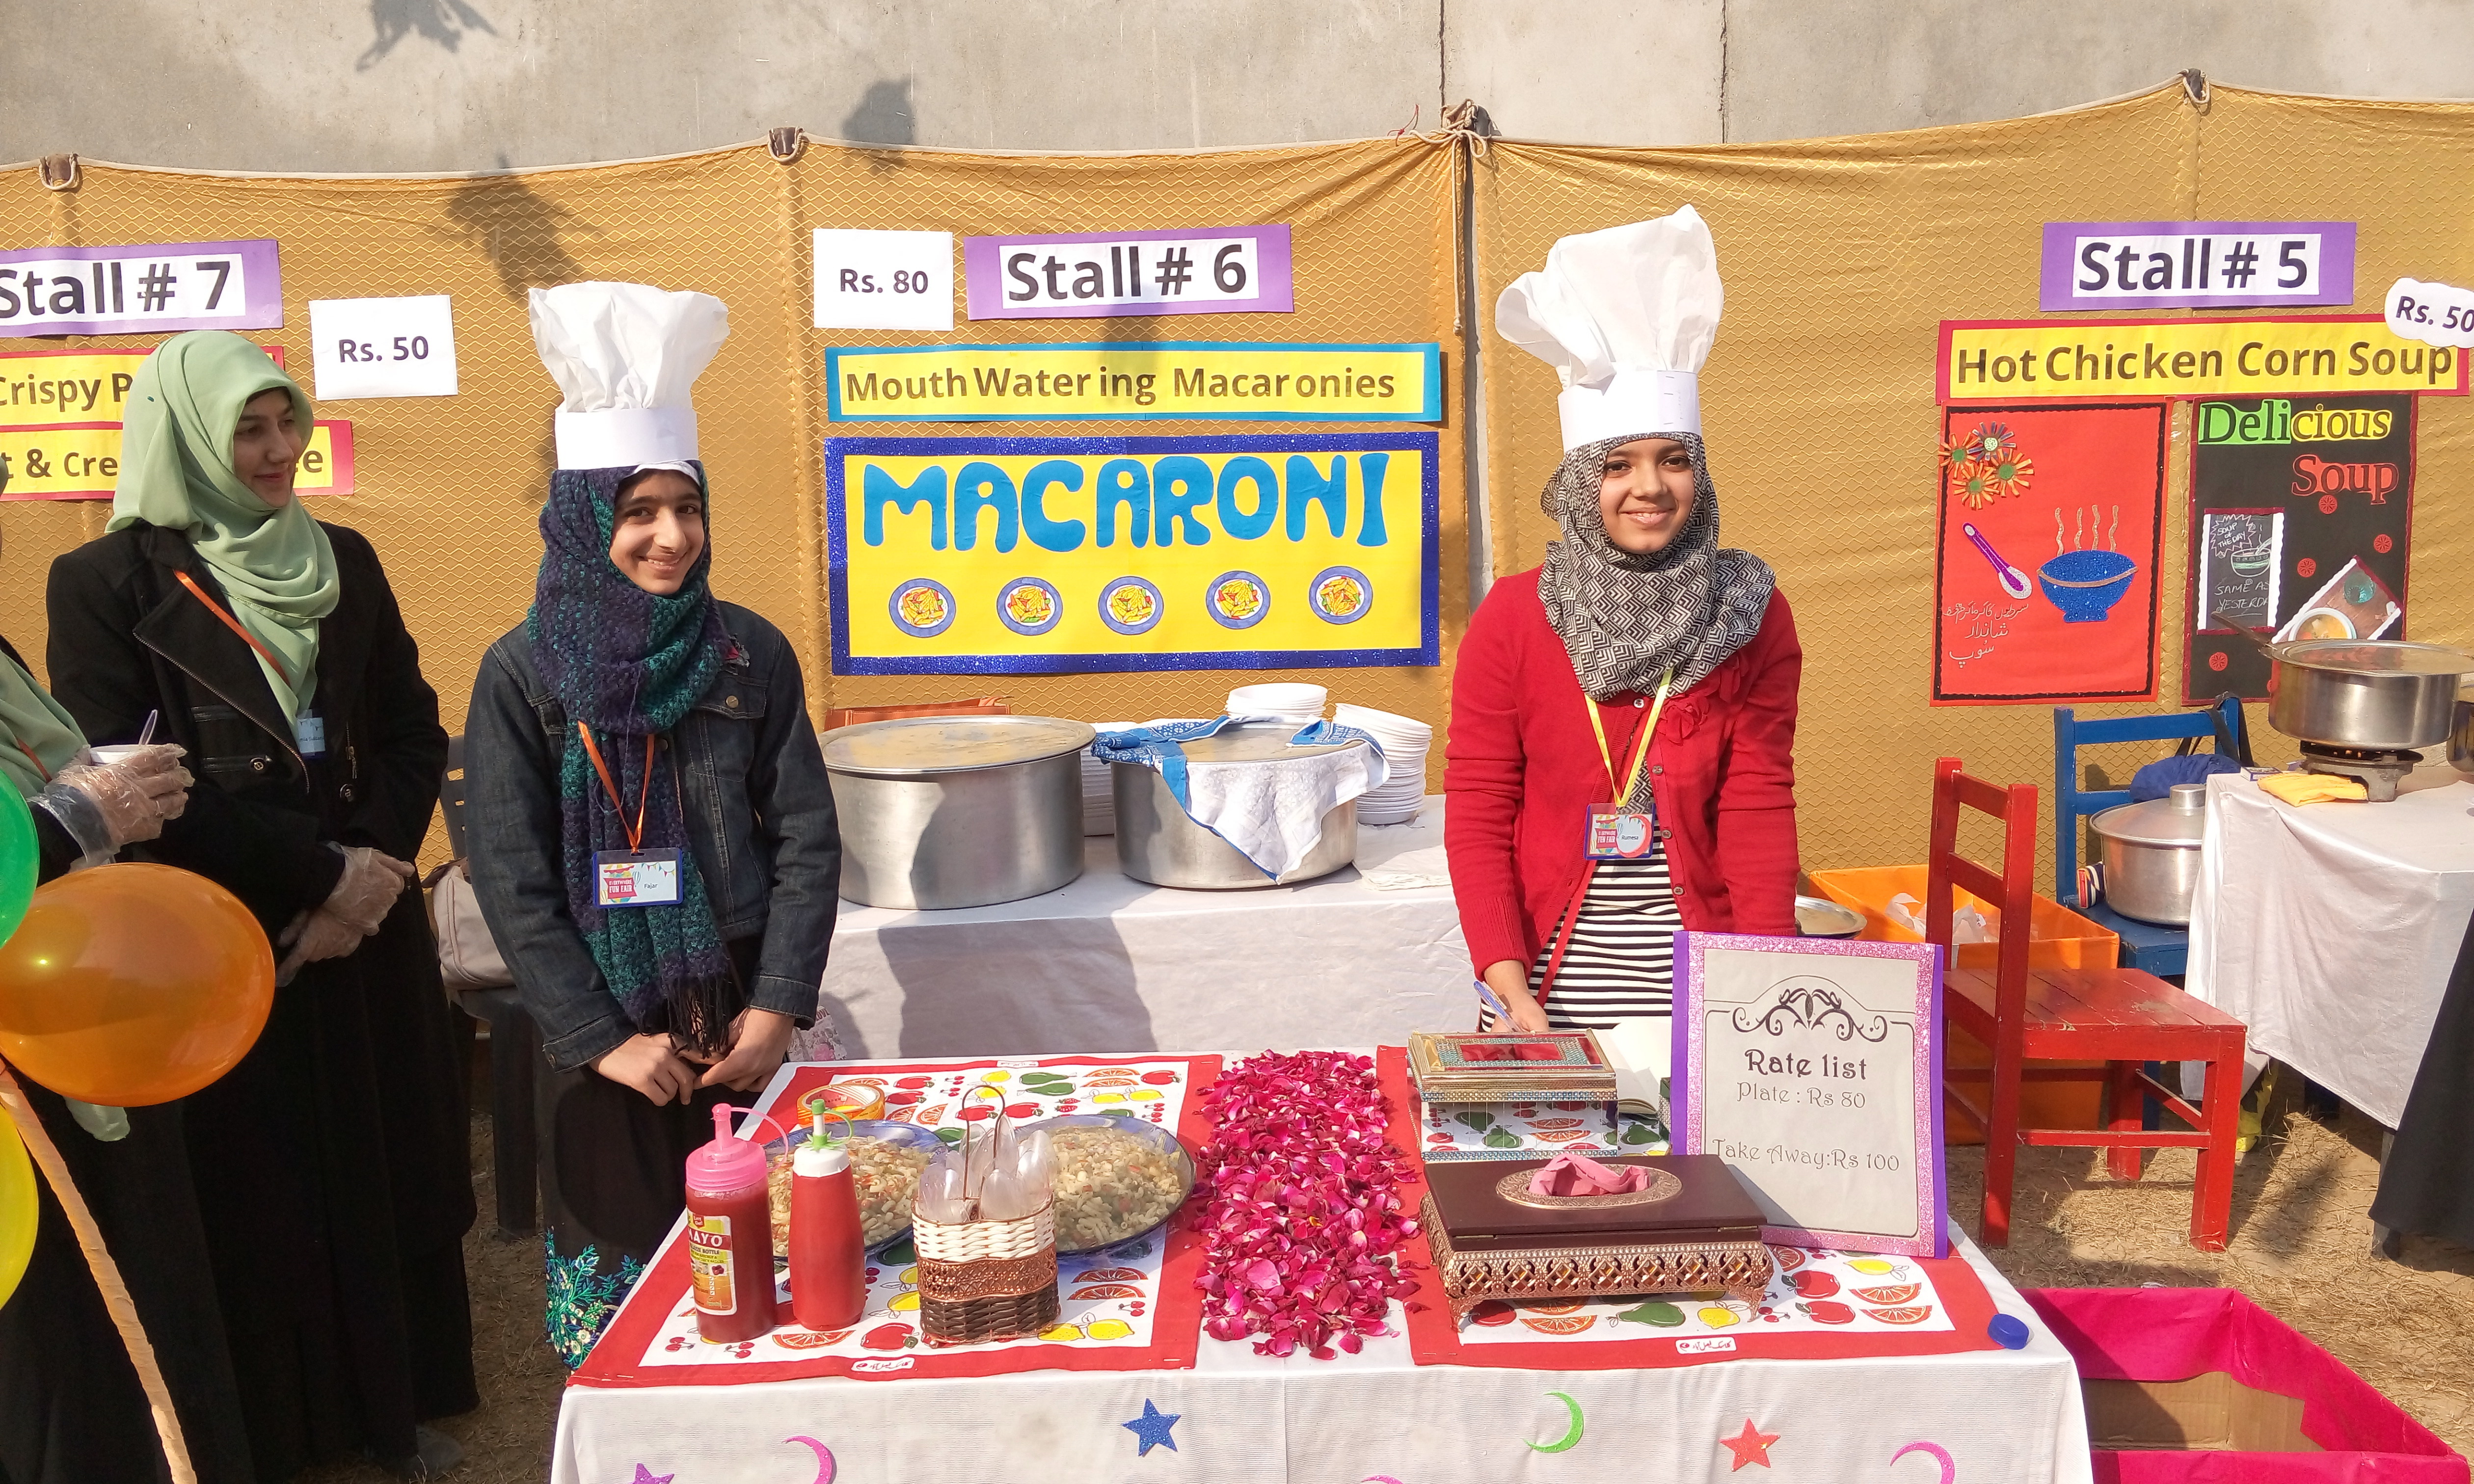 Stall 6 - Mouth Watering Macaronies